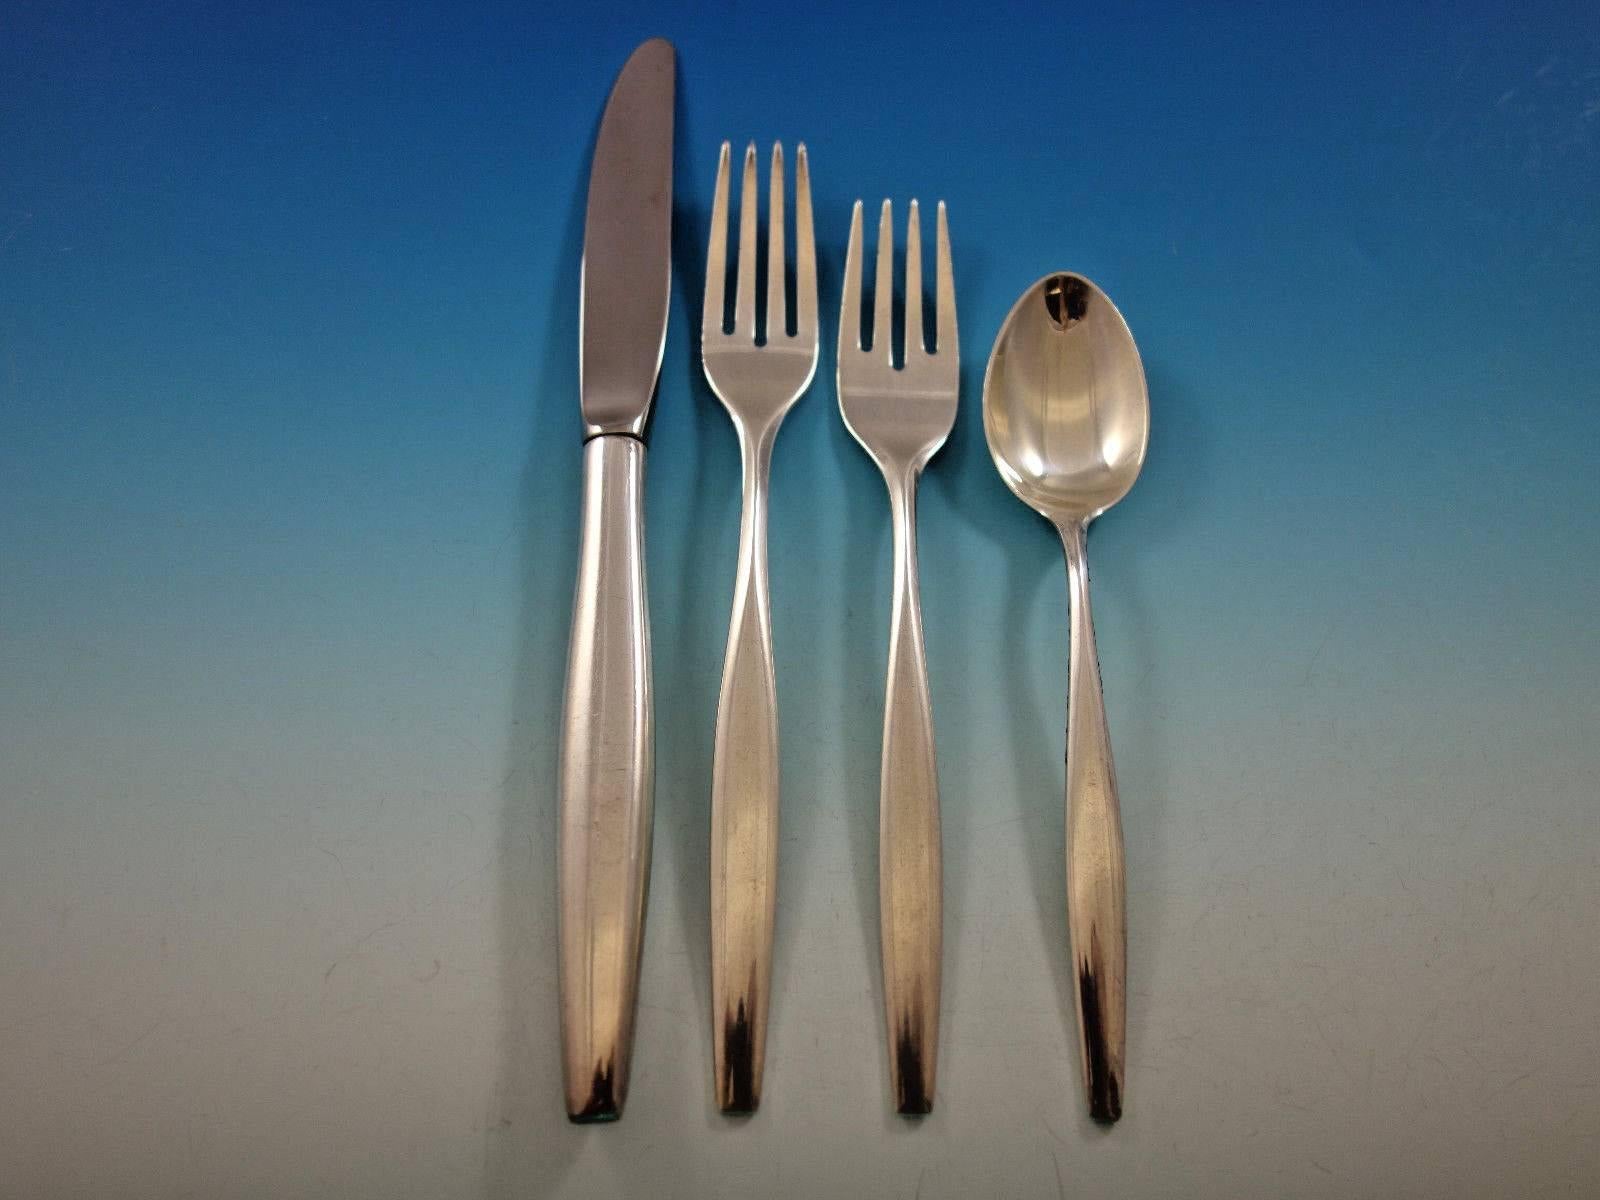 Signet by Kirk Sterling Silver Flatware Set Service 55 Pcs, Mid-Century Modern In Excellent Condition For Sale In Big Bend, WI